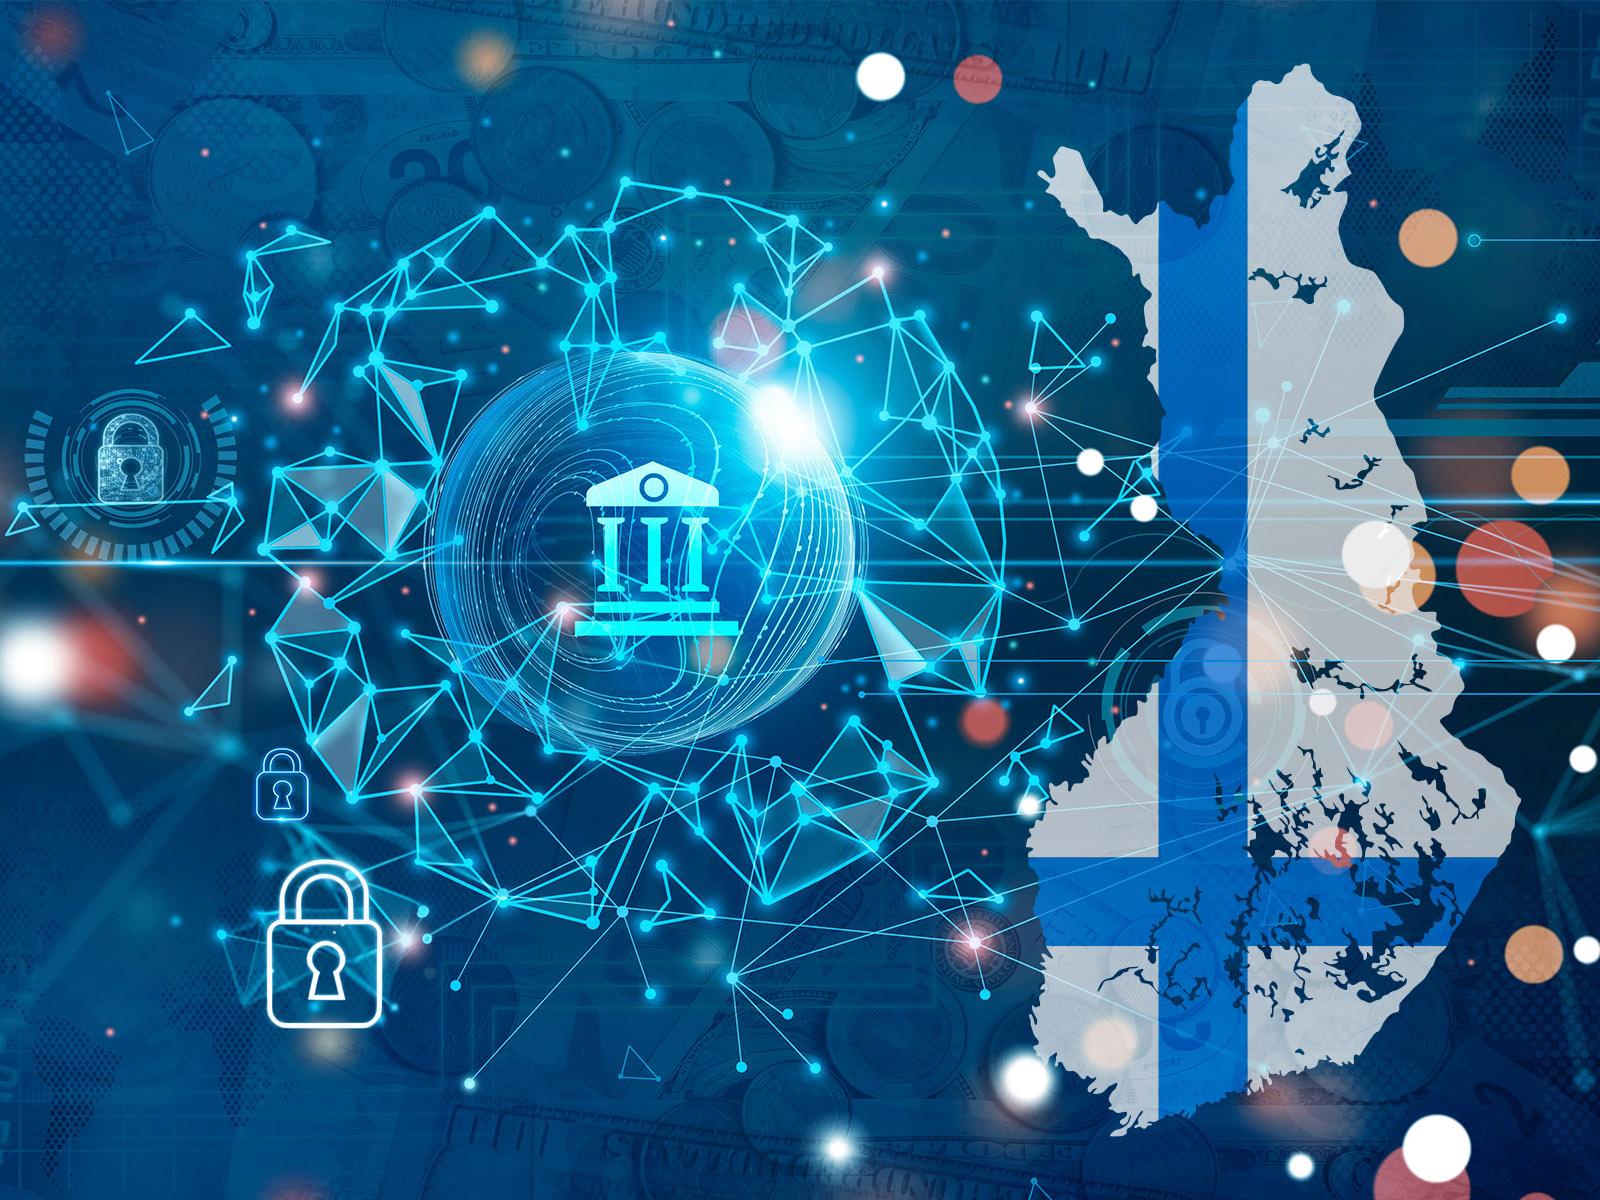 Composite image featuring lock icons, a building icon, and an outline of the country of Finland with its national flag overlaid on it